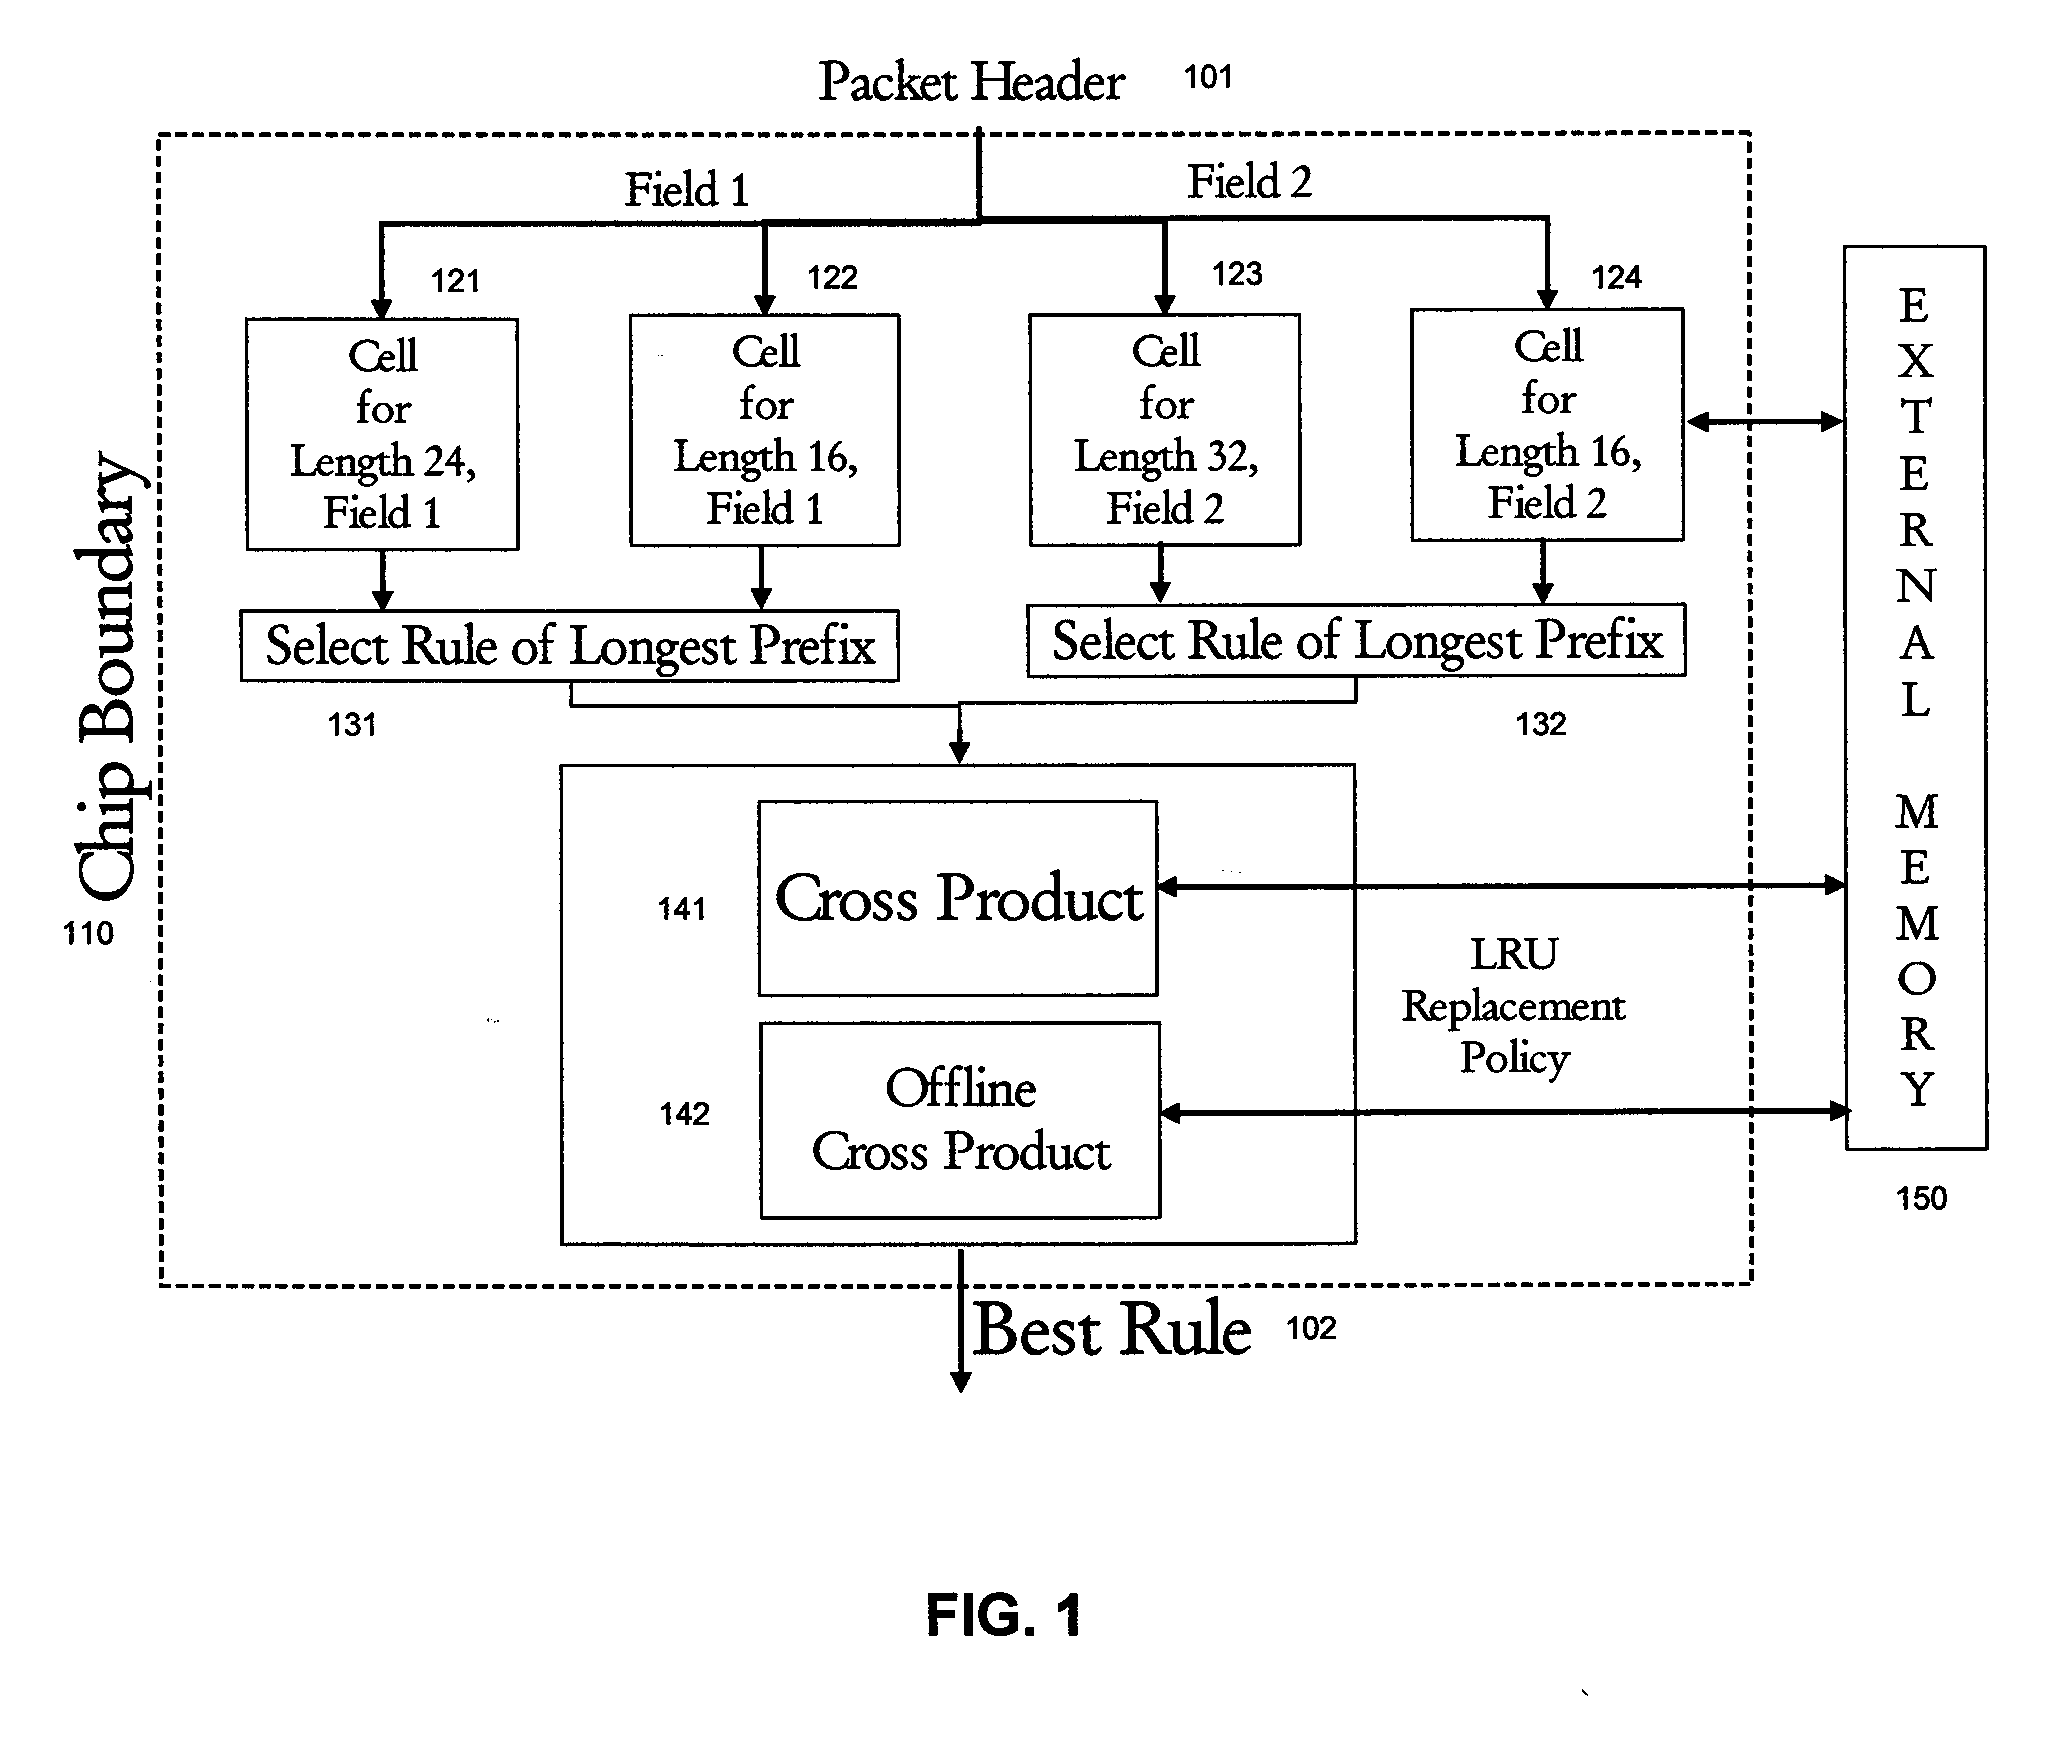 Information Retrieval Architecture for Packet Classification